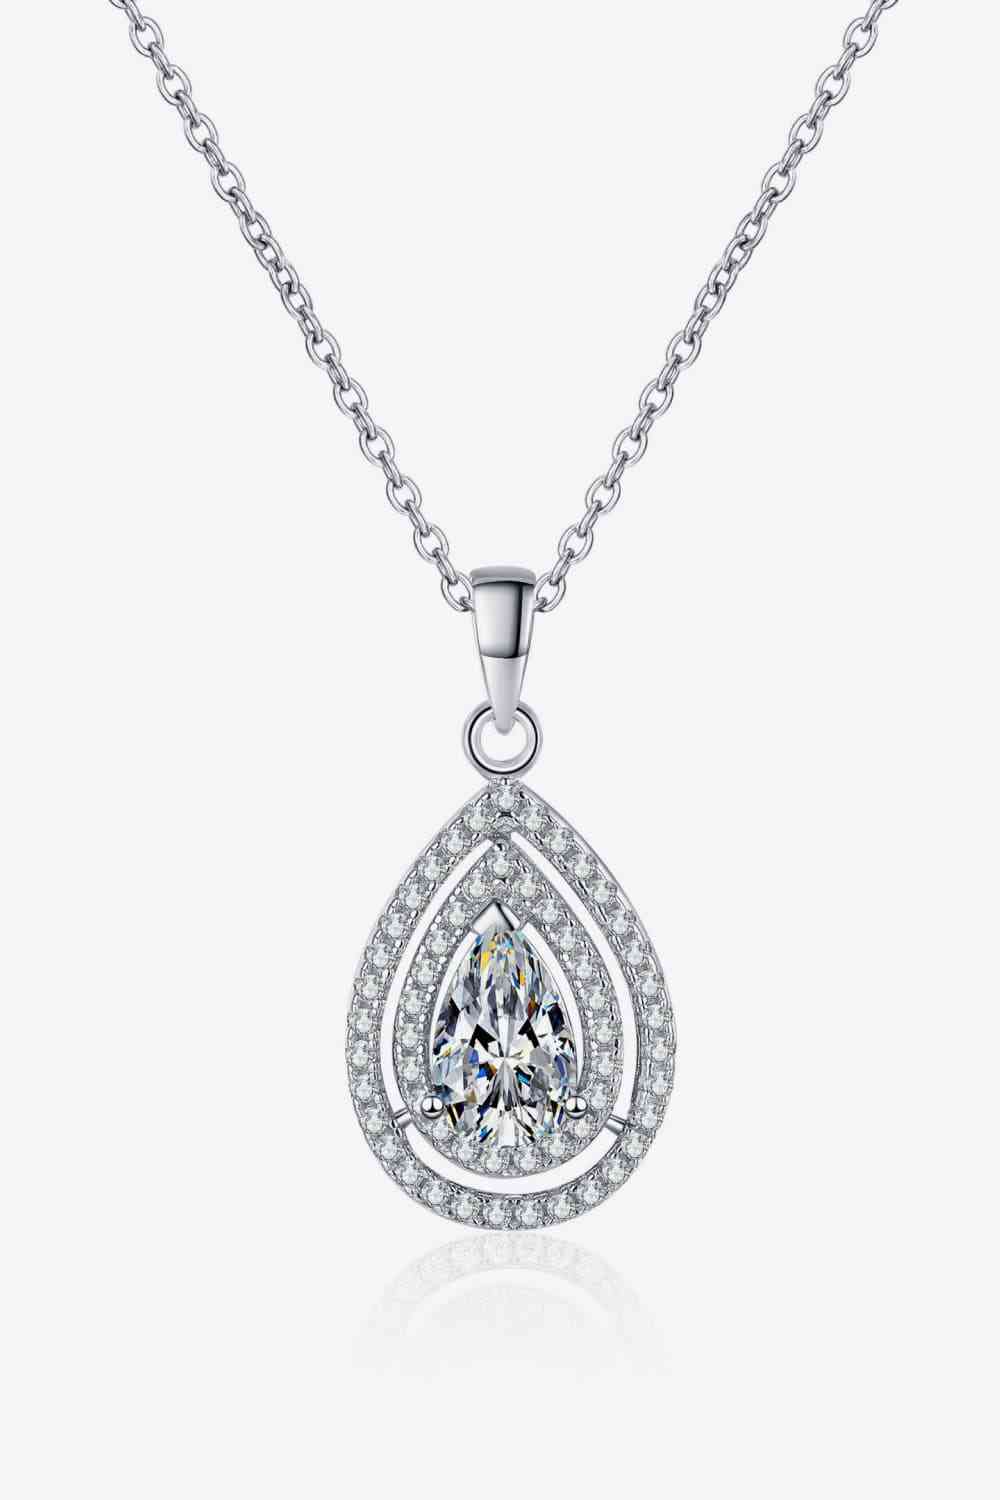 Teardrop Pendant 1 Carat Moissanite Necklace product only